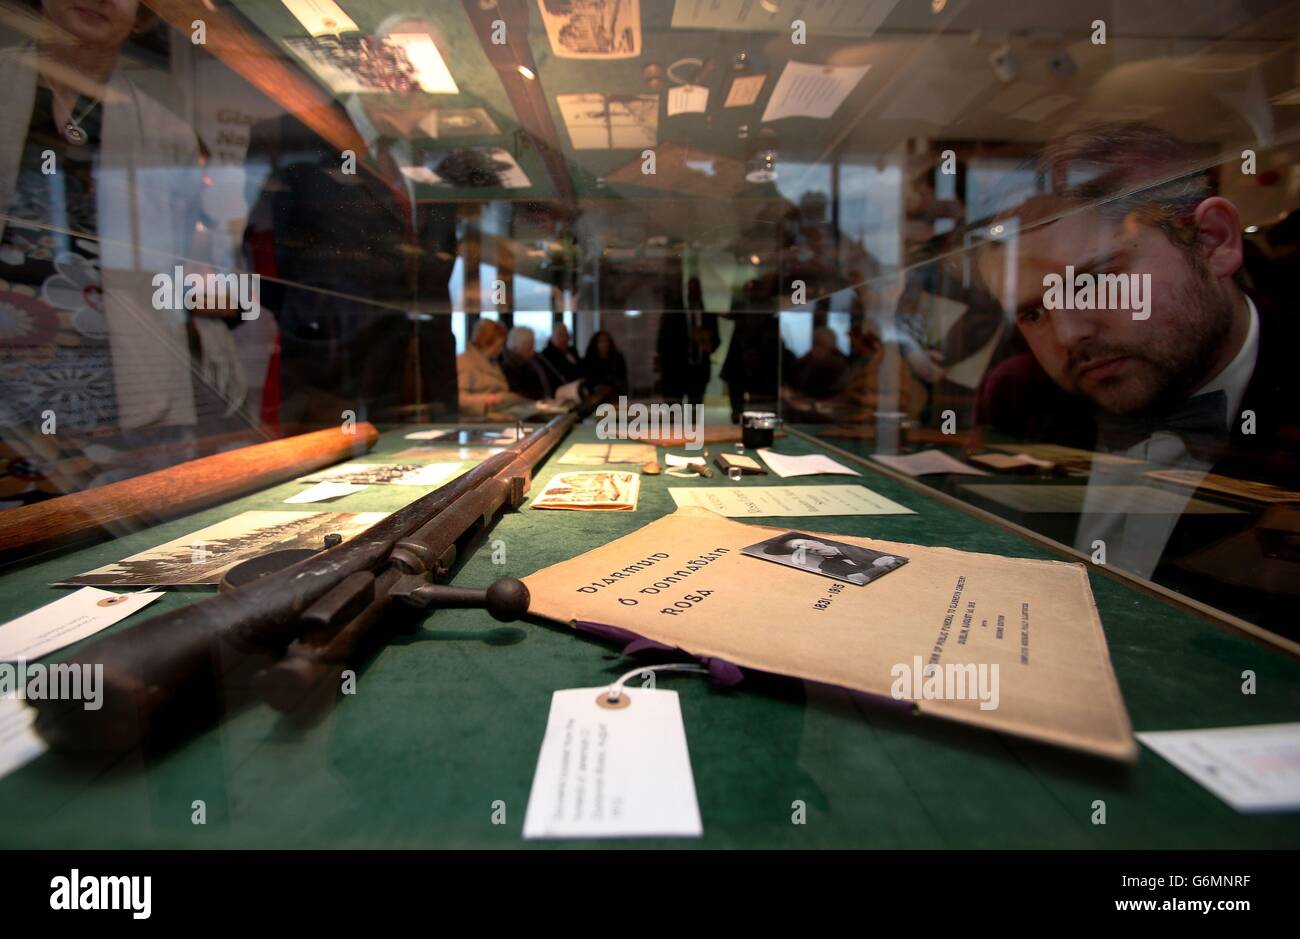 Peter Kavanagh of Active Retirement Ireland views exhibition pieces including a German Mauser rifle, manufactured in 1870, landed at Howth July 26th 1914 aboard the Asgard, by Erskine Childers as part of a major consignment of arms for the Irish Volunteers and a souvenir of the funeral of O'Donovan Rossa, at the launch of an exhibition to mark the centenary of the Irish Citizens Army and Irish Volunteers at the Glasnevin cemetery museum in Dublin. Stock Photo